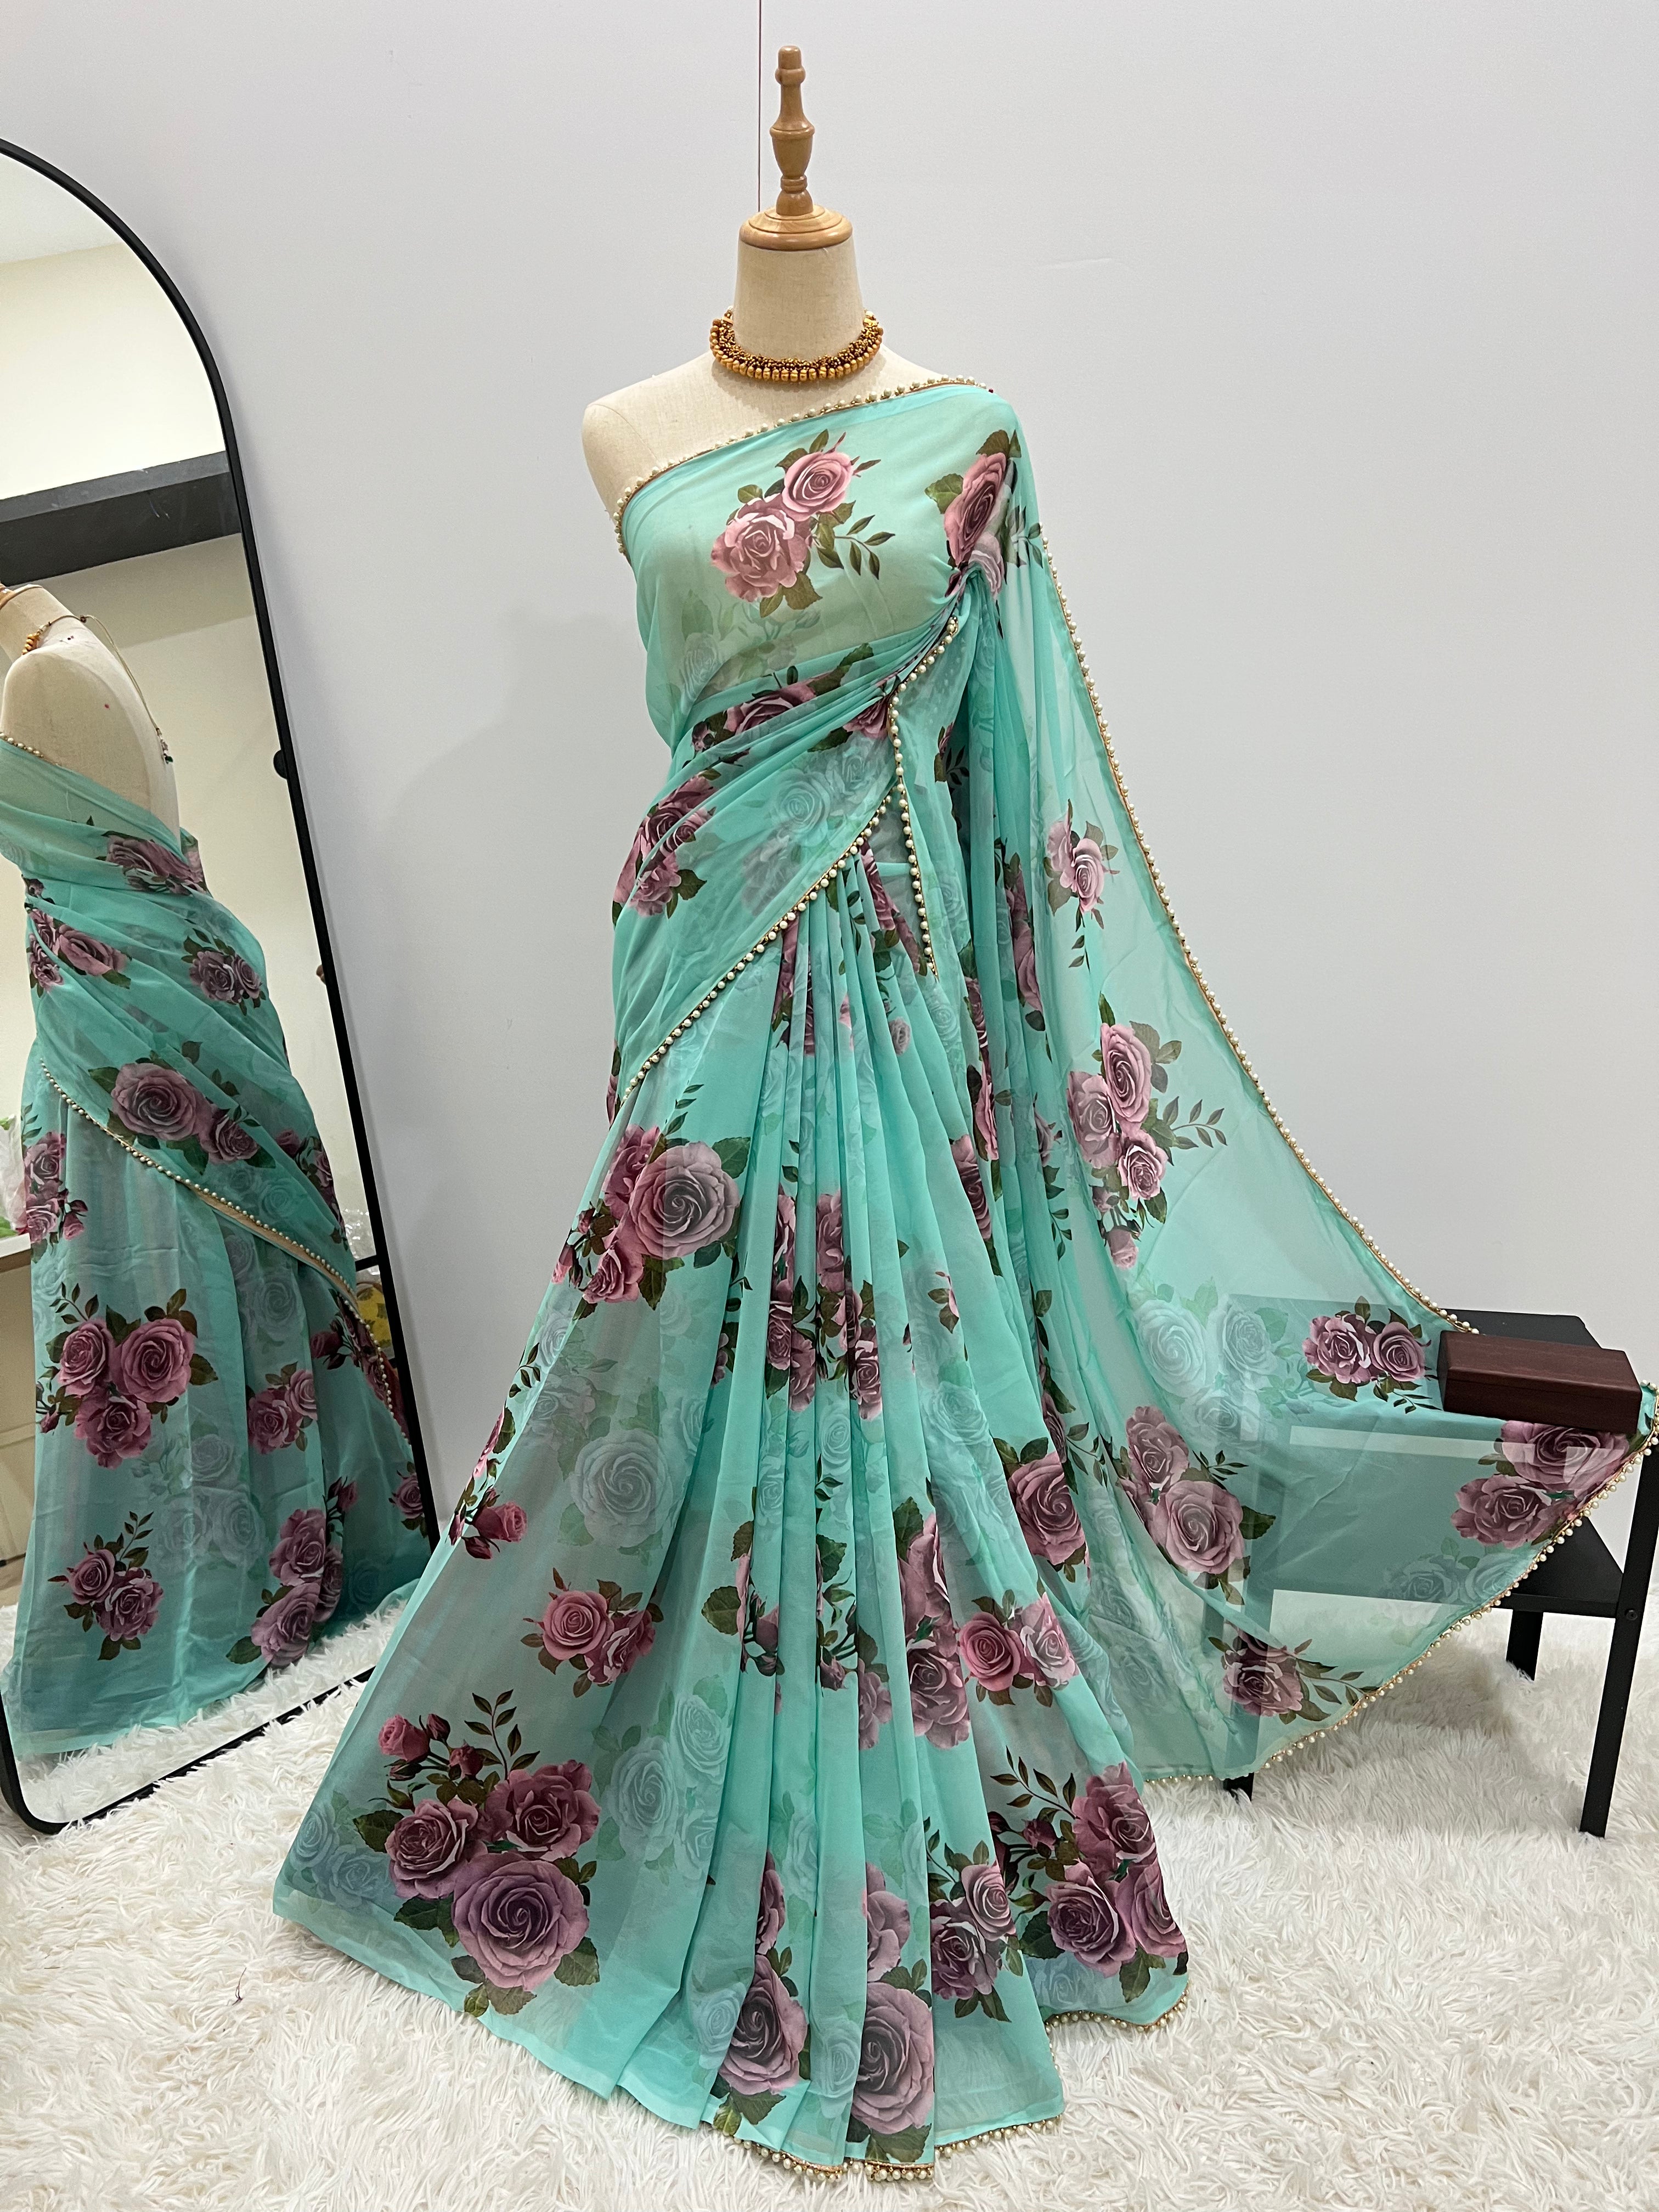 Georgette Pearl Lace Floral Saree - Summer Green